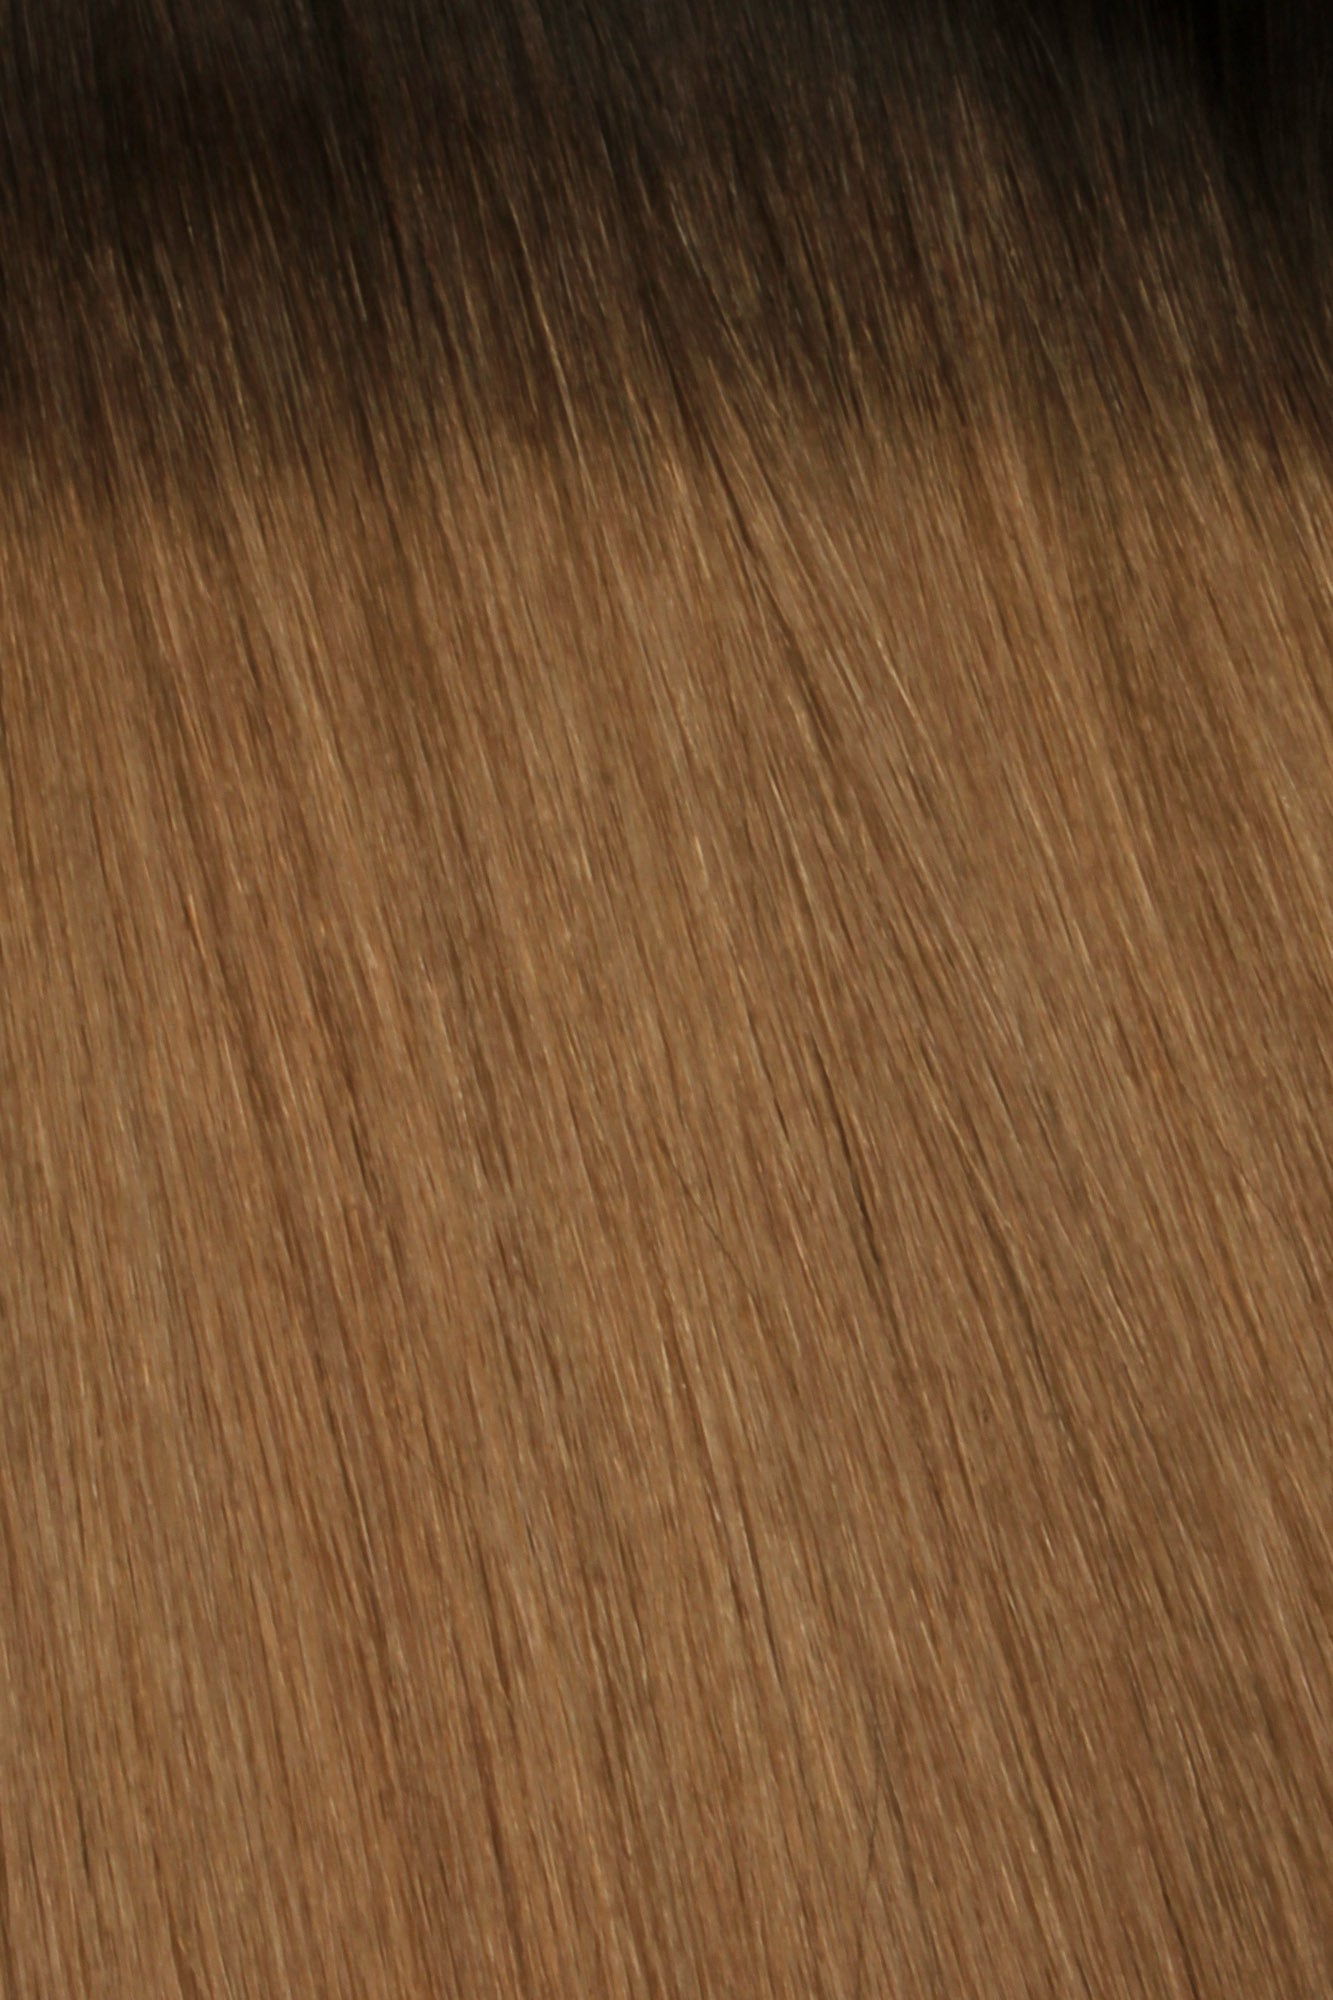 SEAMLESS® Flat Weft 18 Inches - SWAY Hair Extensions Rooted-Chestnut-Brown-Mix-R2-4-6 Natural SEAMLESS® Flat Weft 18 Inches extensions. Thin, flexible, and discreet. 100% Double Drawn Remy Human Hair. Versatile and reusable